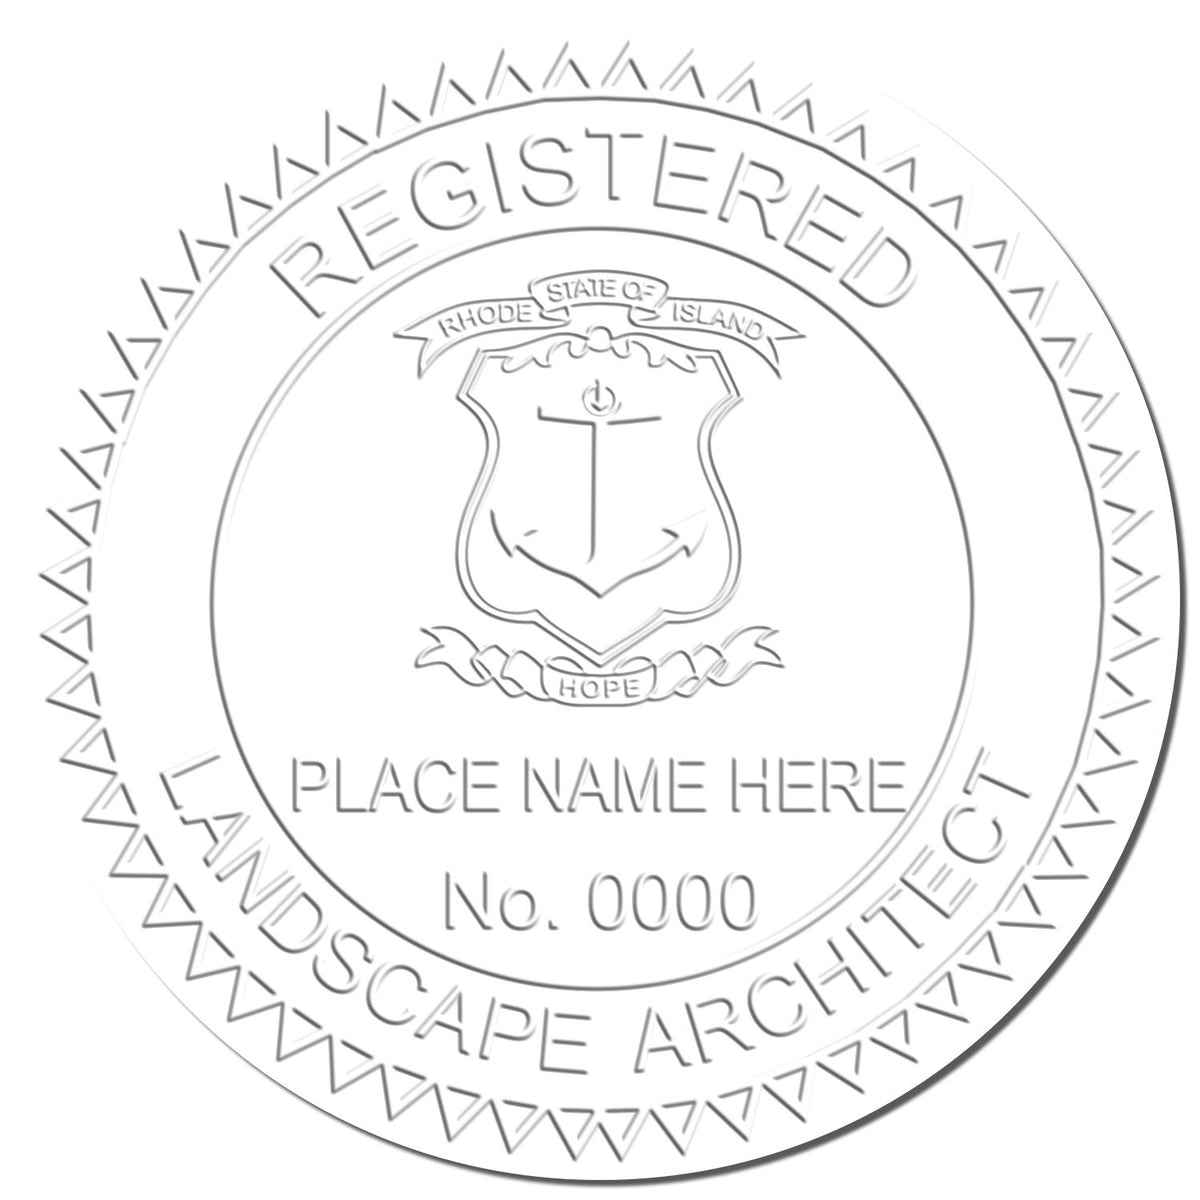 This paper is stamped with a sample imprint of the Hybrid Rhode Island Landscape Architect Seal, signifying its quality and reliability.